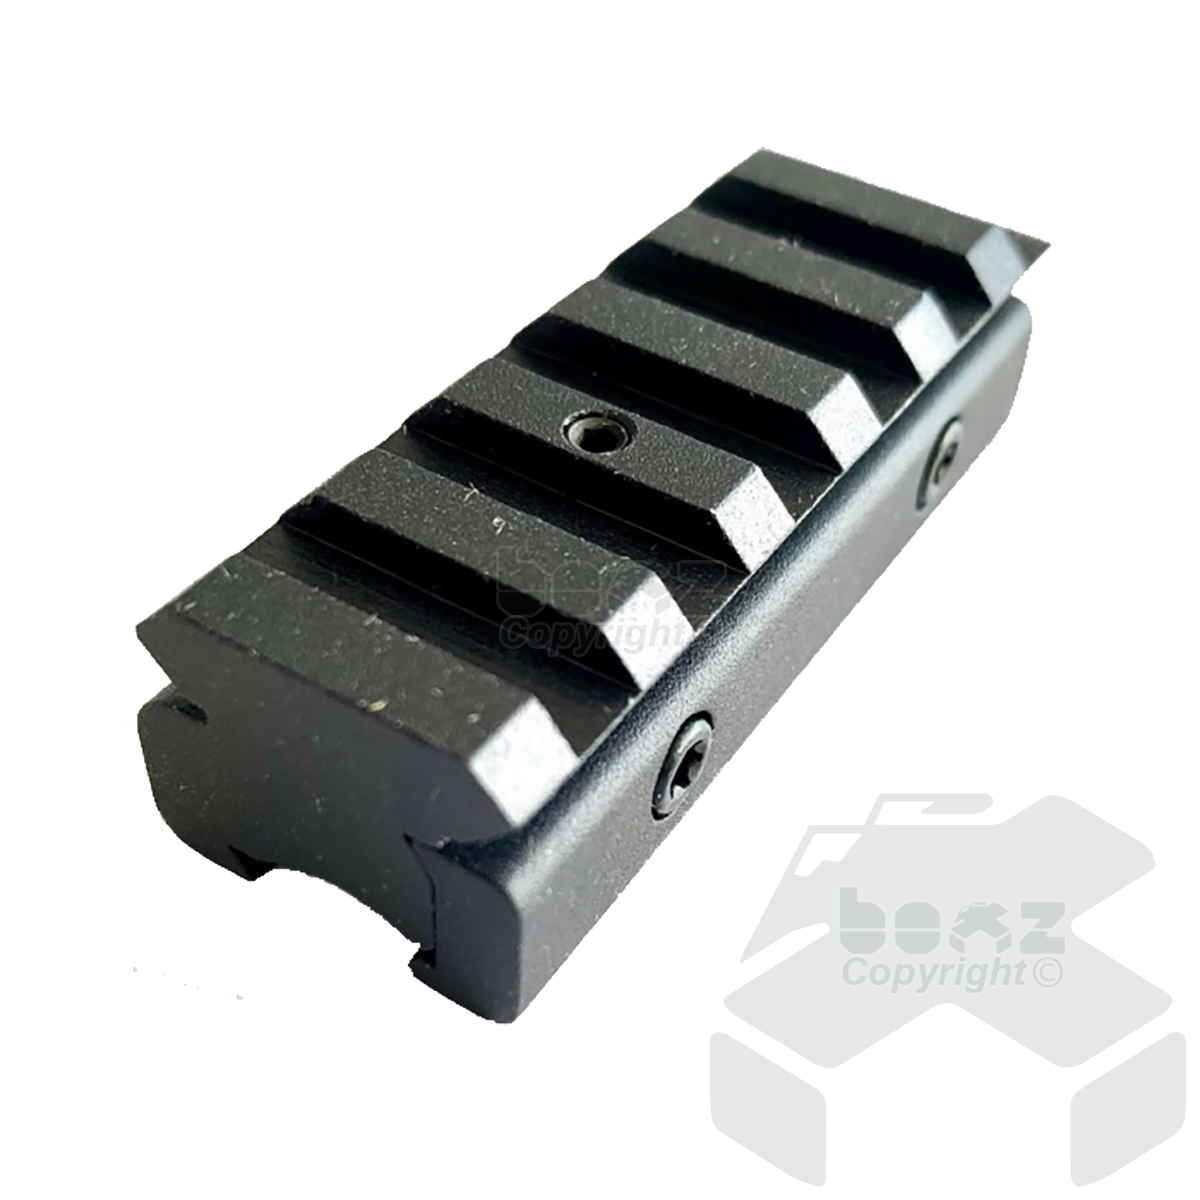 Boxz One Piece Mount Adaptor - Weaver / Picatinny to 11mm Dovetail